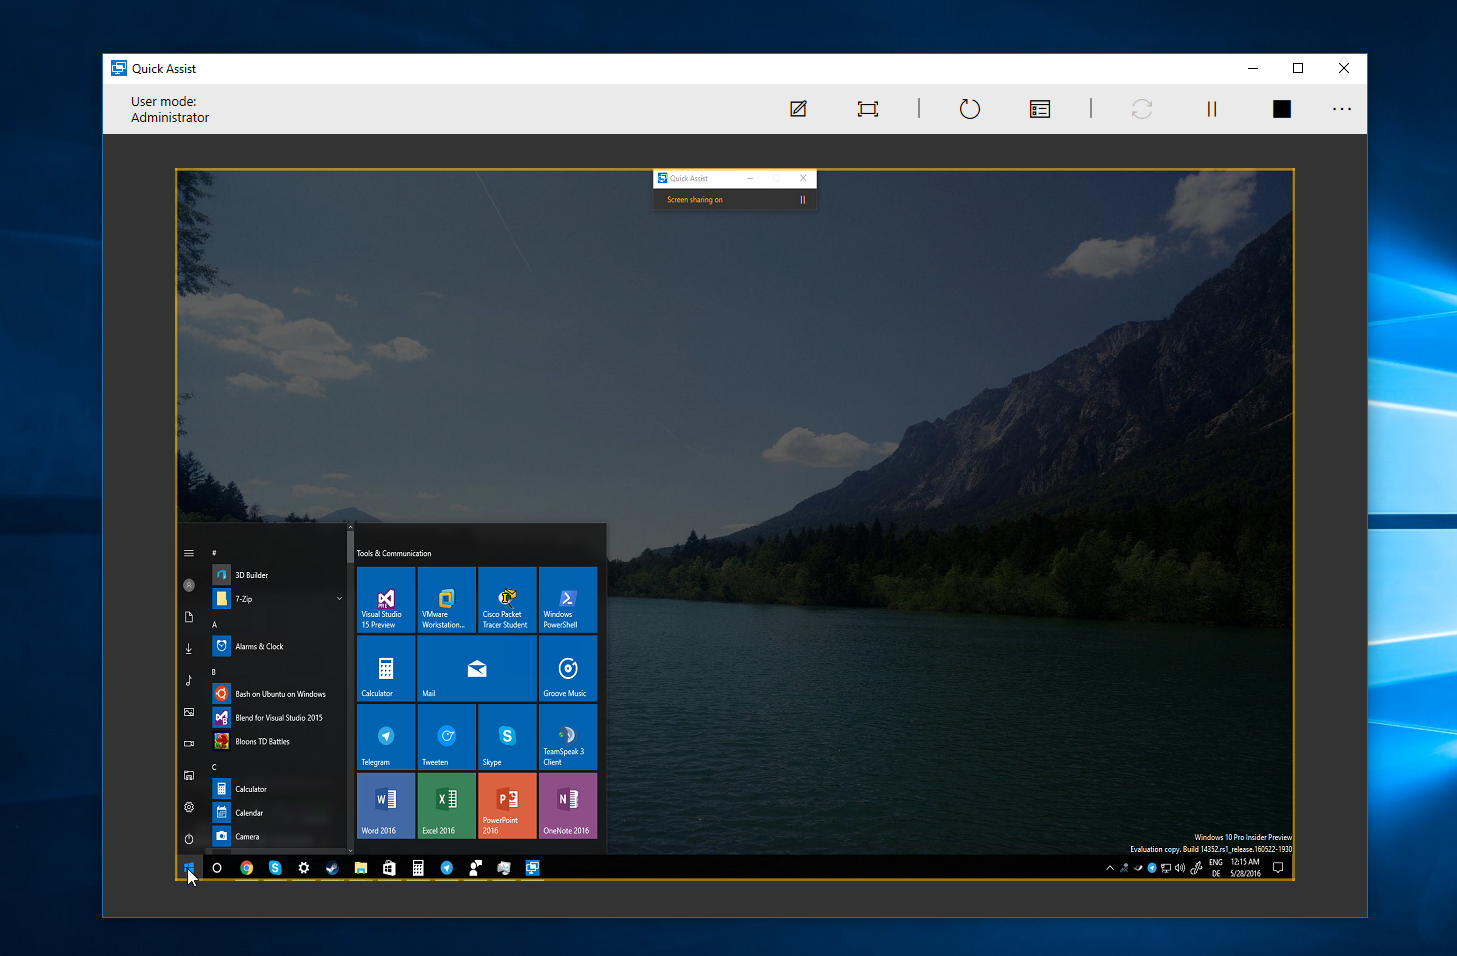 Microsoft is working on a TeamViewer competitor for Windows 10